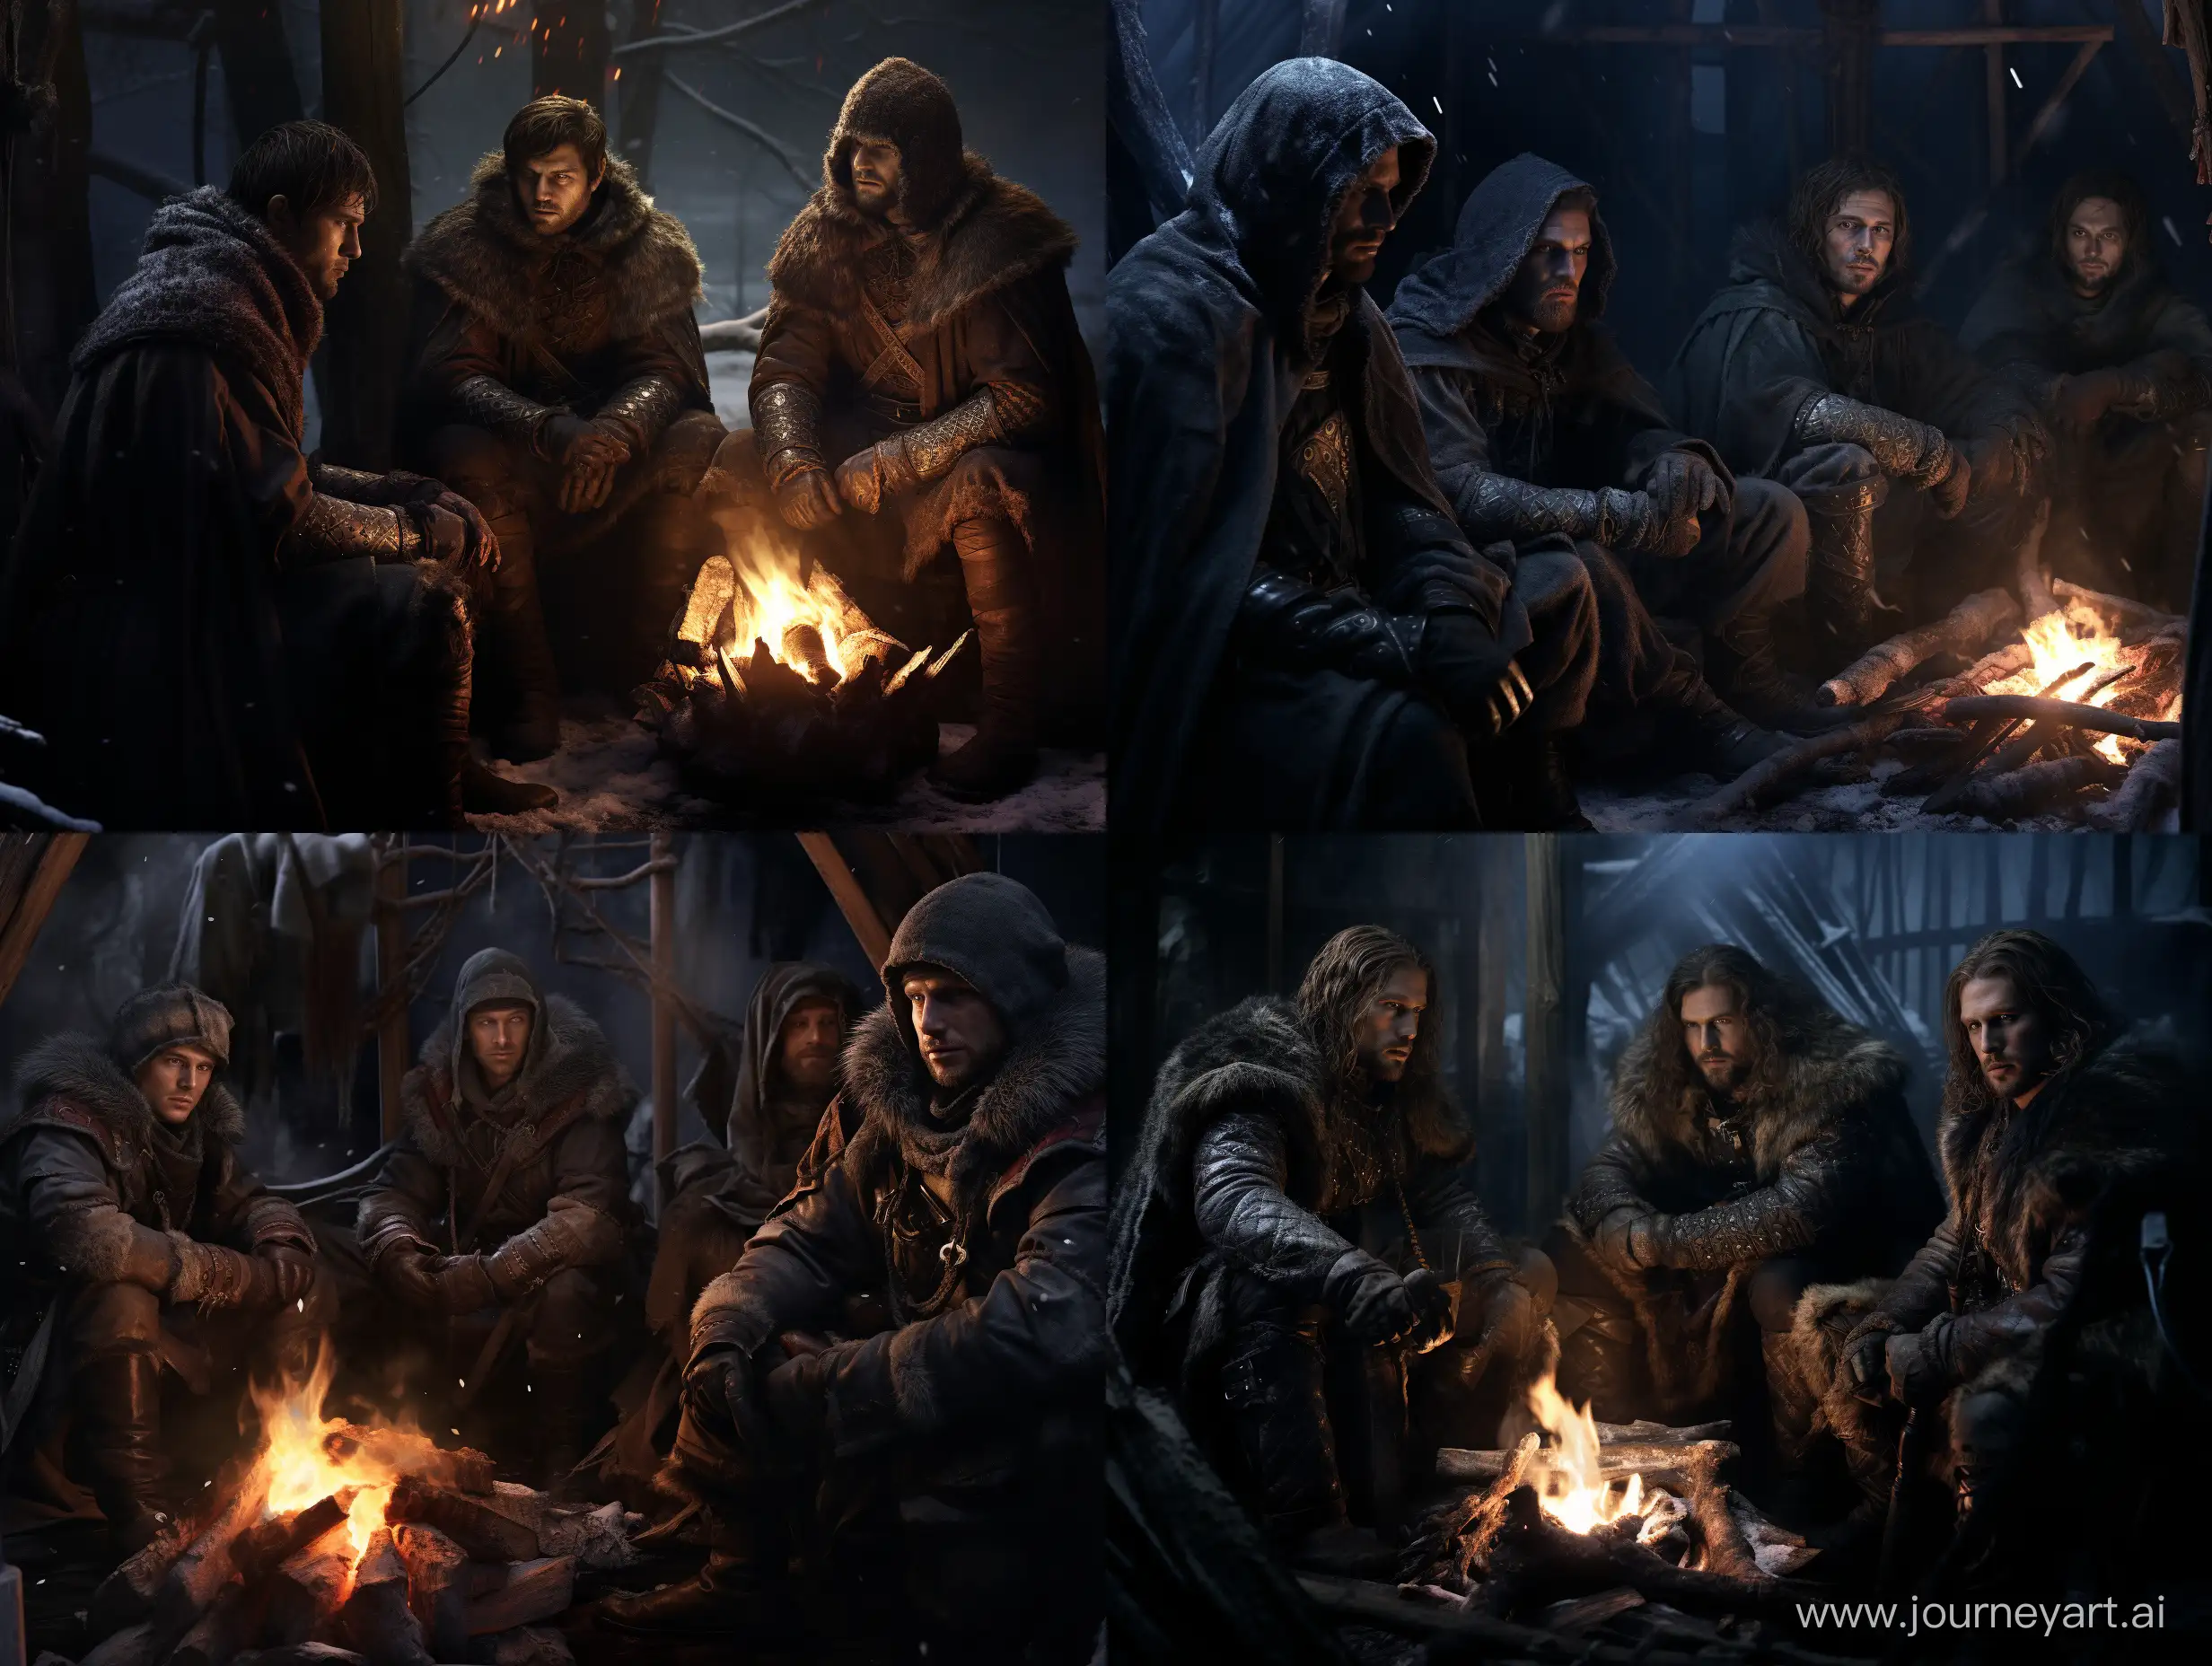 Medieval-Hunters-Resting-by-the-Fire-in-Dark-Fantasy-Setting